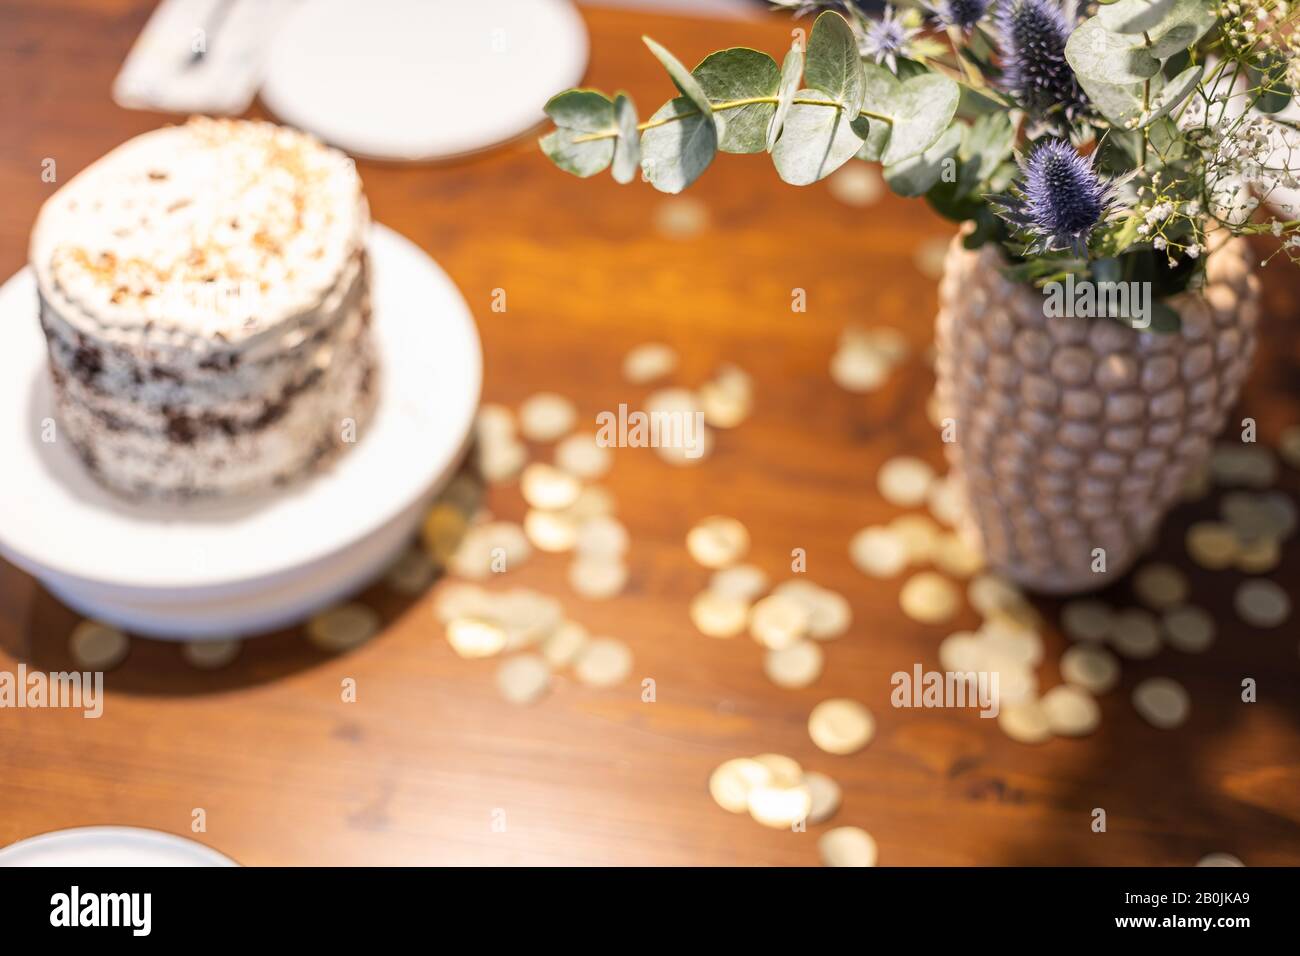 Vase with bouquet of flowers on a table with golden confetti and a naked chocolate cake with sugar pearls. Stock Photo